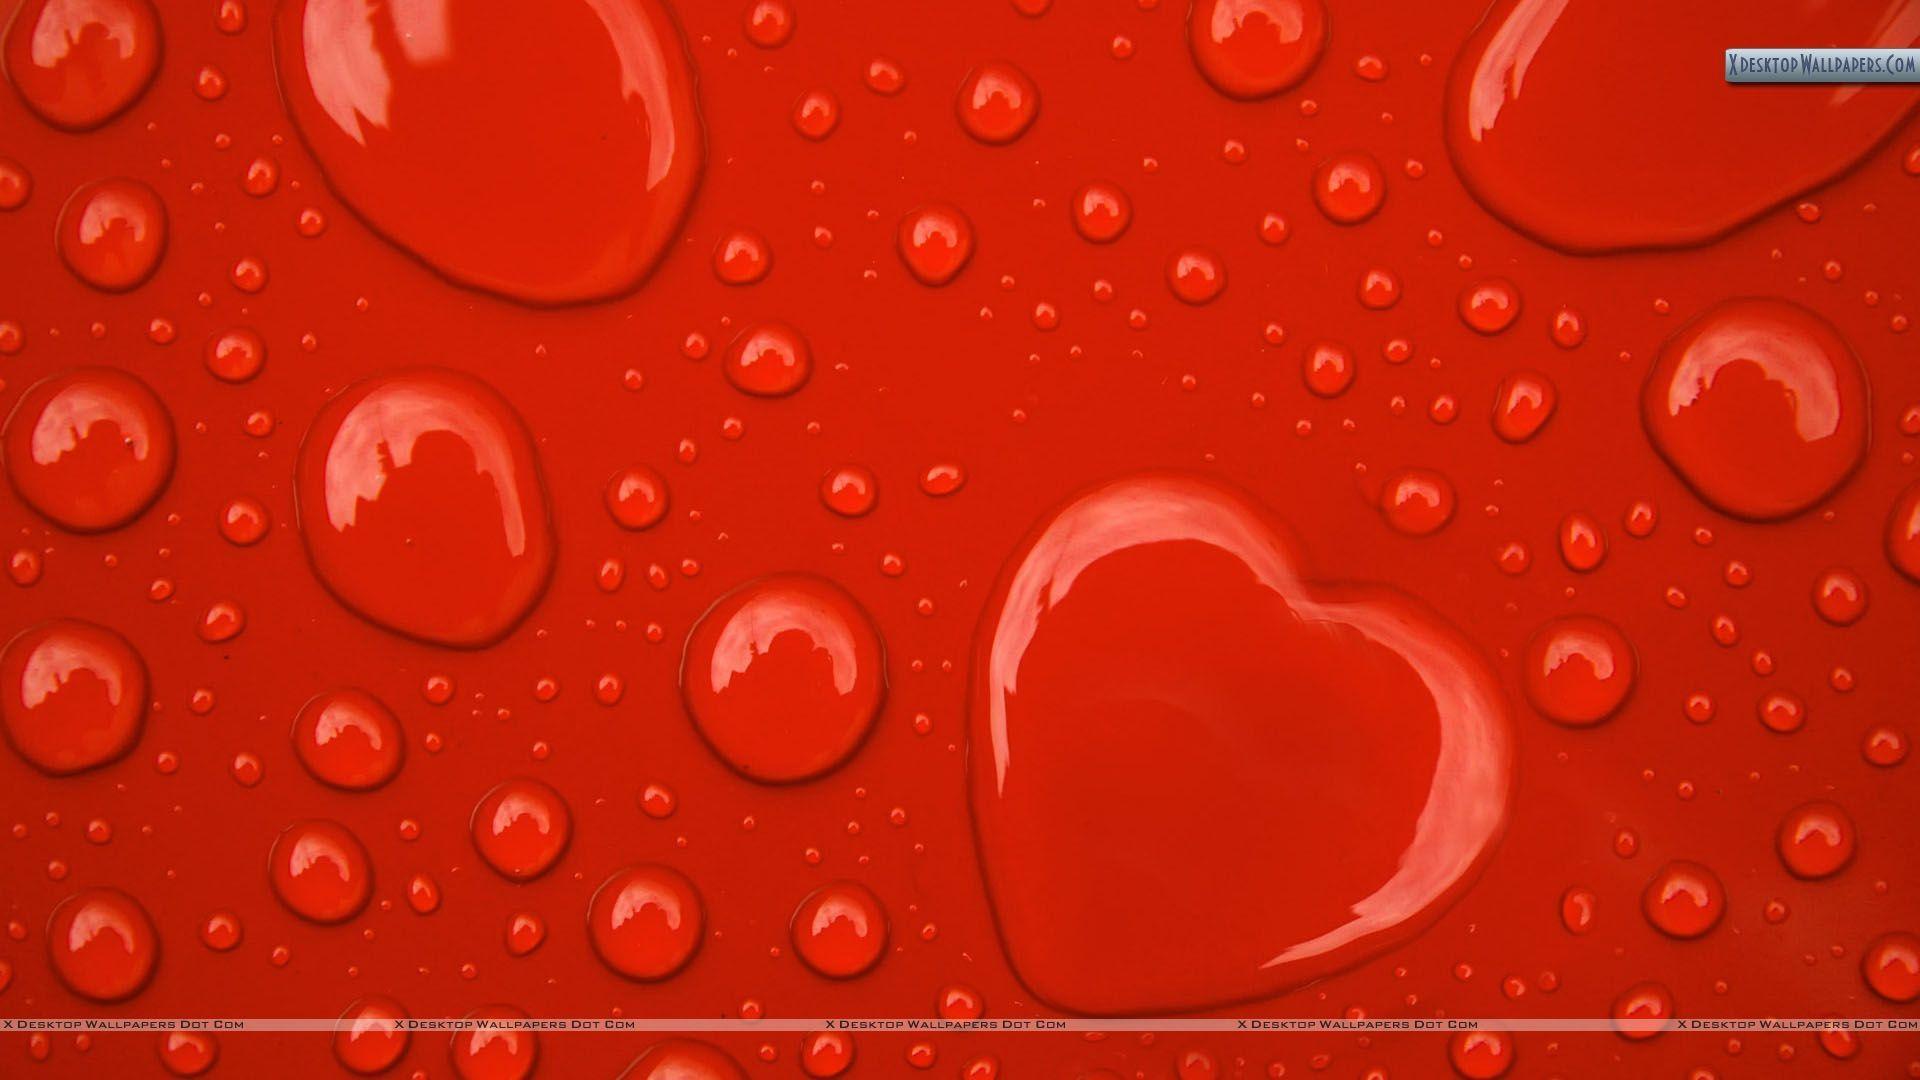 Water Drop Hearts On Red Background Wallpaper Black 1920x1080PX